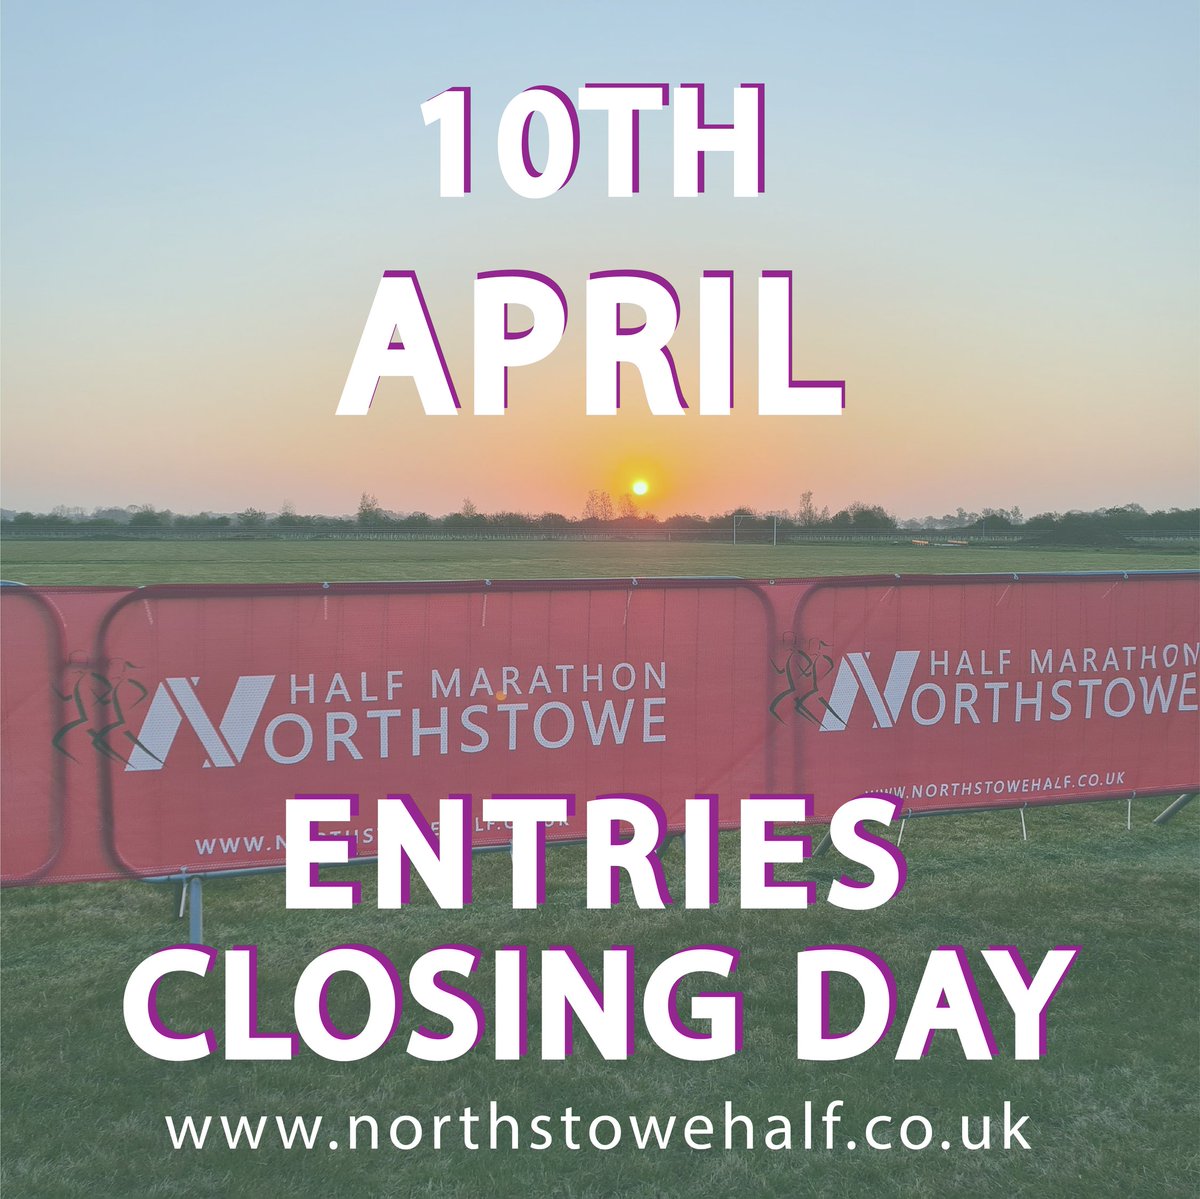 There are only a few days left to sign up⏳️ 🏃🏽‍♀️Flat and scenic course 🥳Friendly atmosphere 🏅Sustainable medal 📷Free photos 🛍Finisher goodies 🙌Supports local charity @cambridge_acorn_project Don't miss out! Sign up today👇 northstowehalf.co.uk #northstowe #halfmarathon